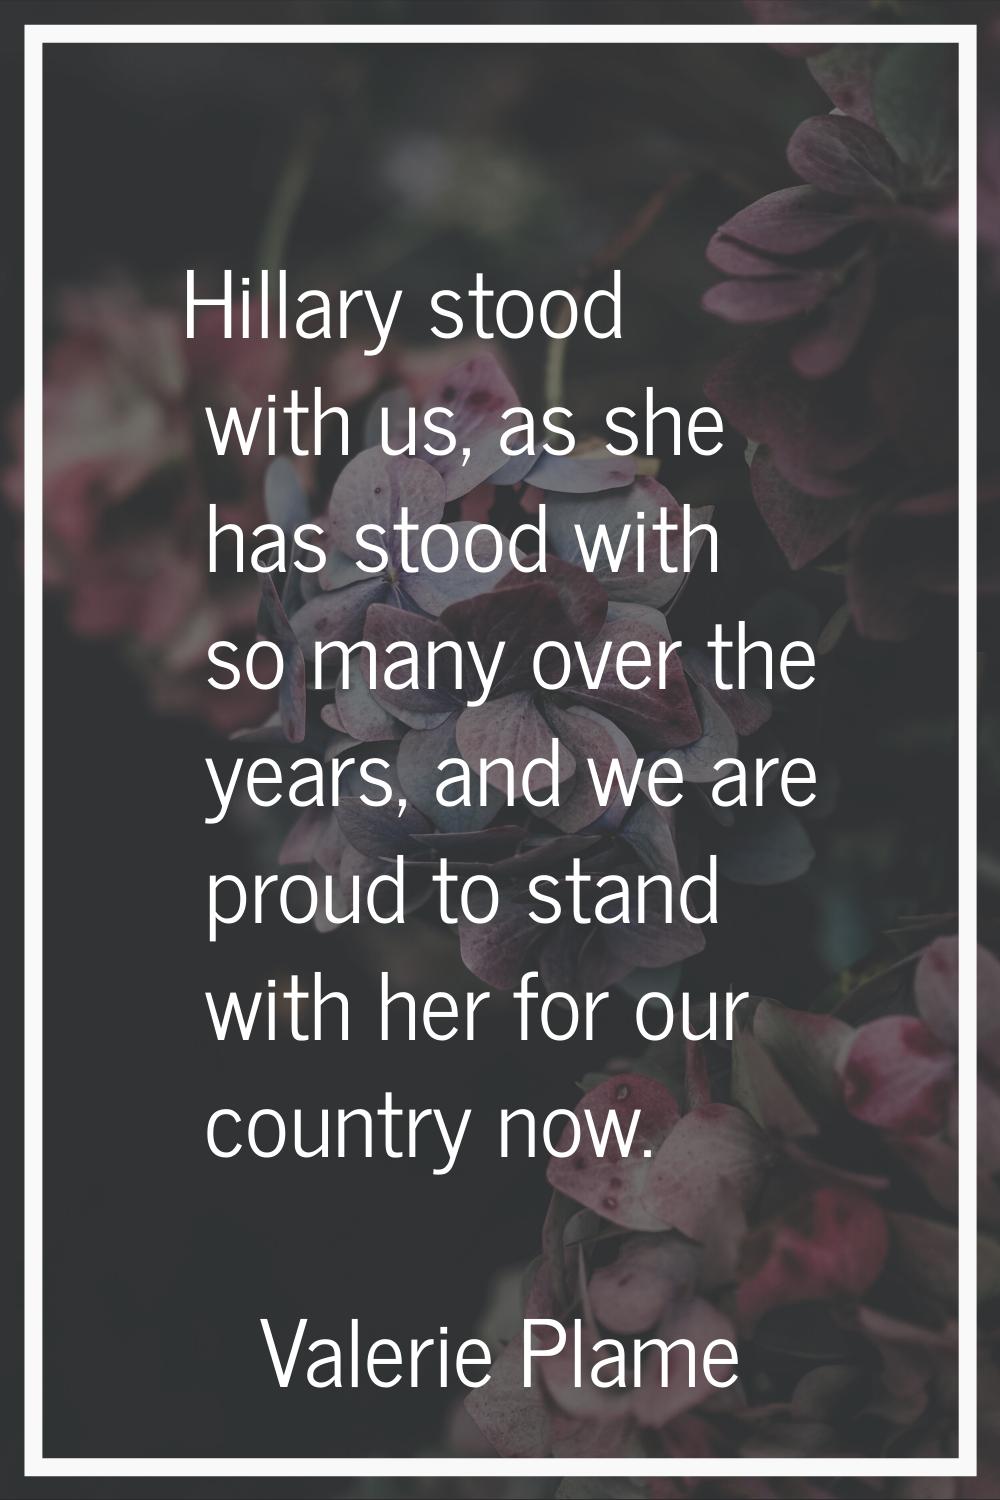 Hillary stood with us, as she has stood with so many over the years, and we are proud to stand with